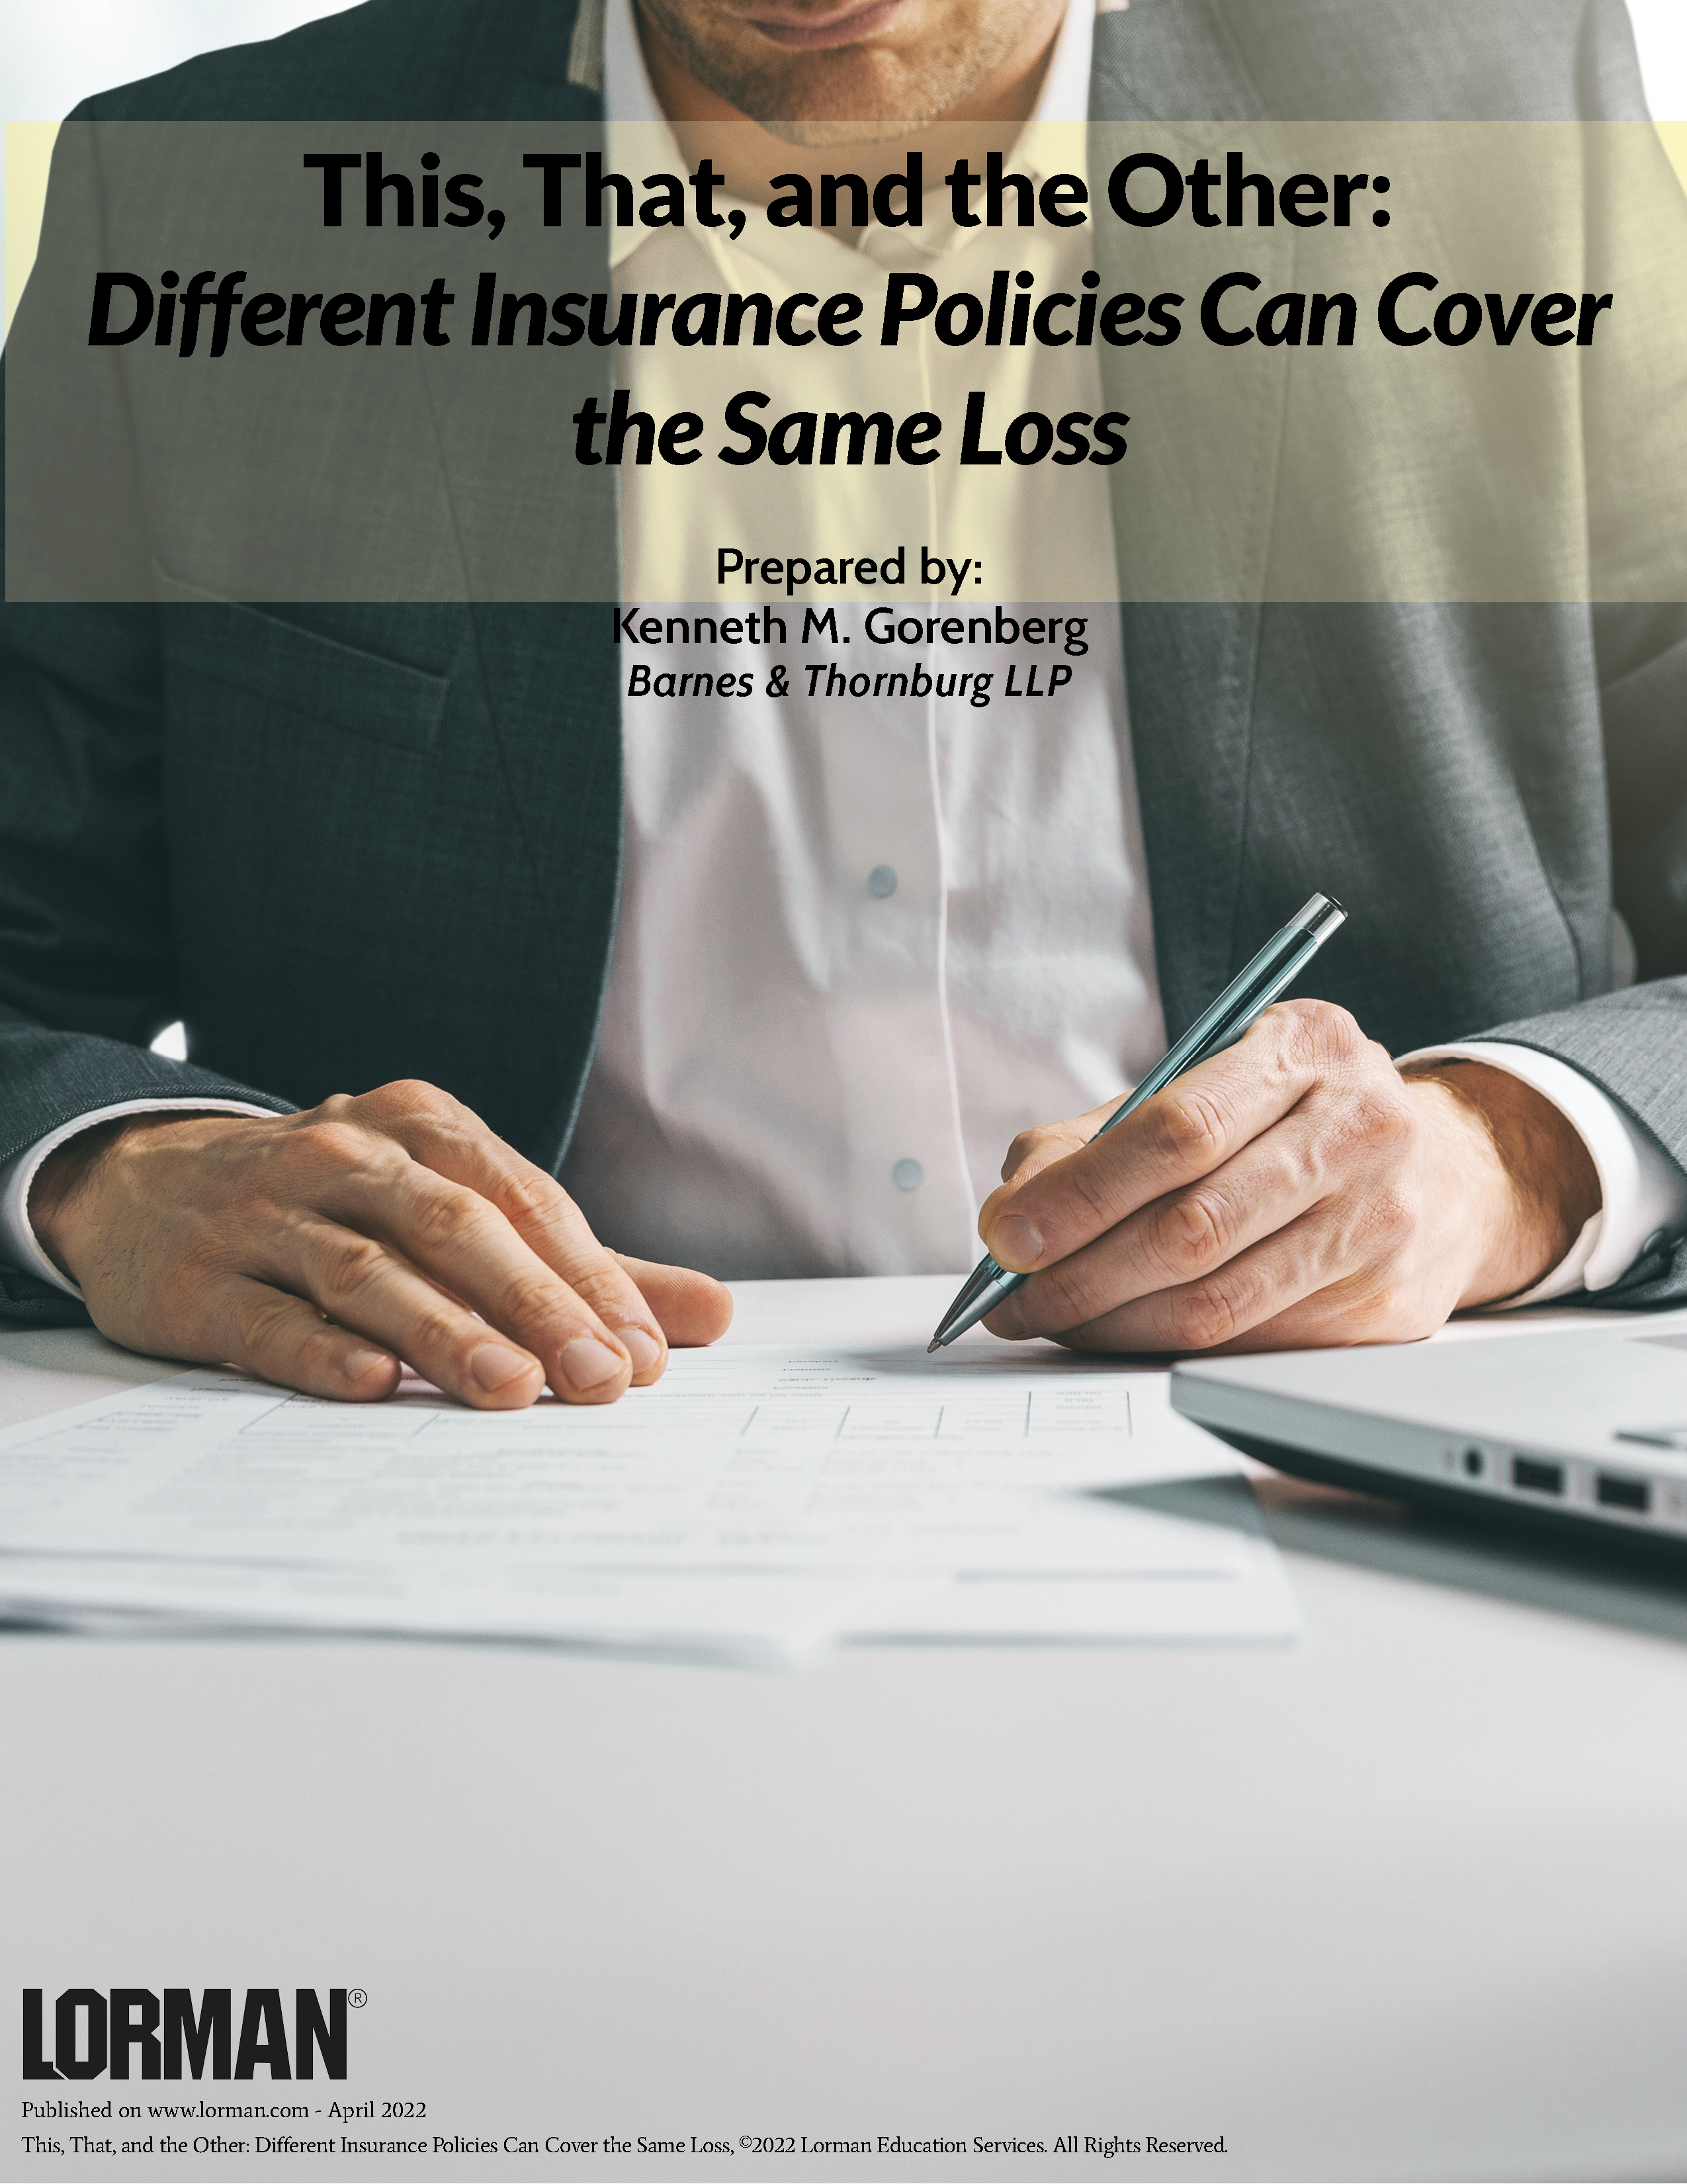 This, That, and the Other: Different Insurance Policies Can Cover the Same Loss